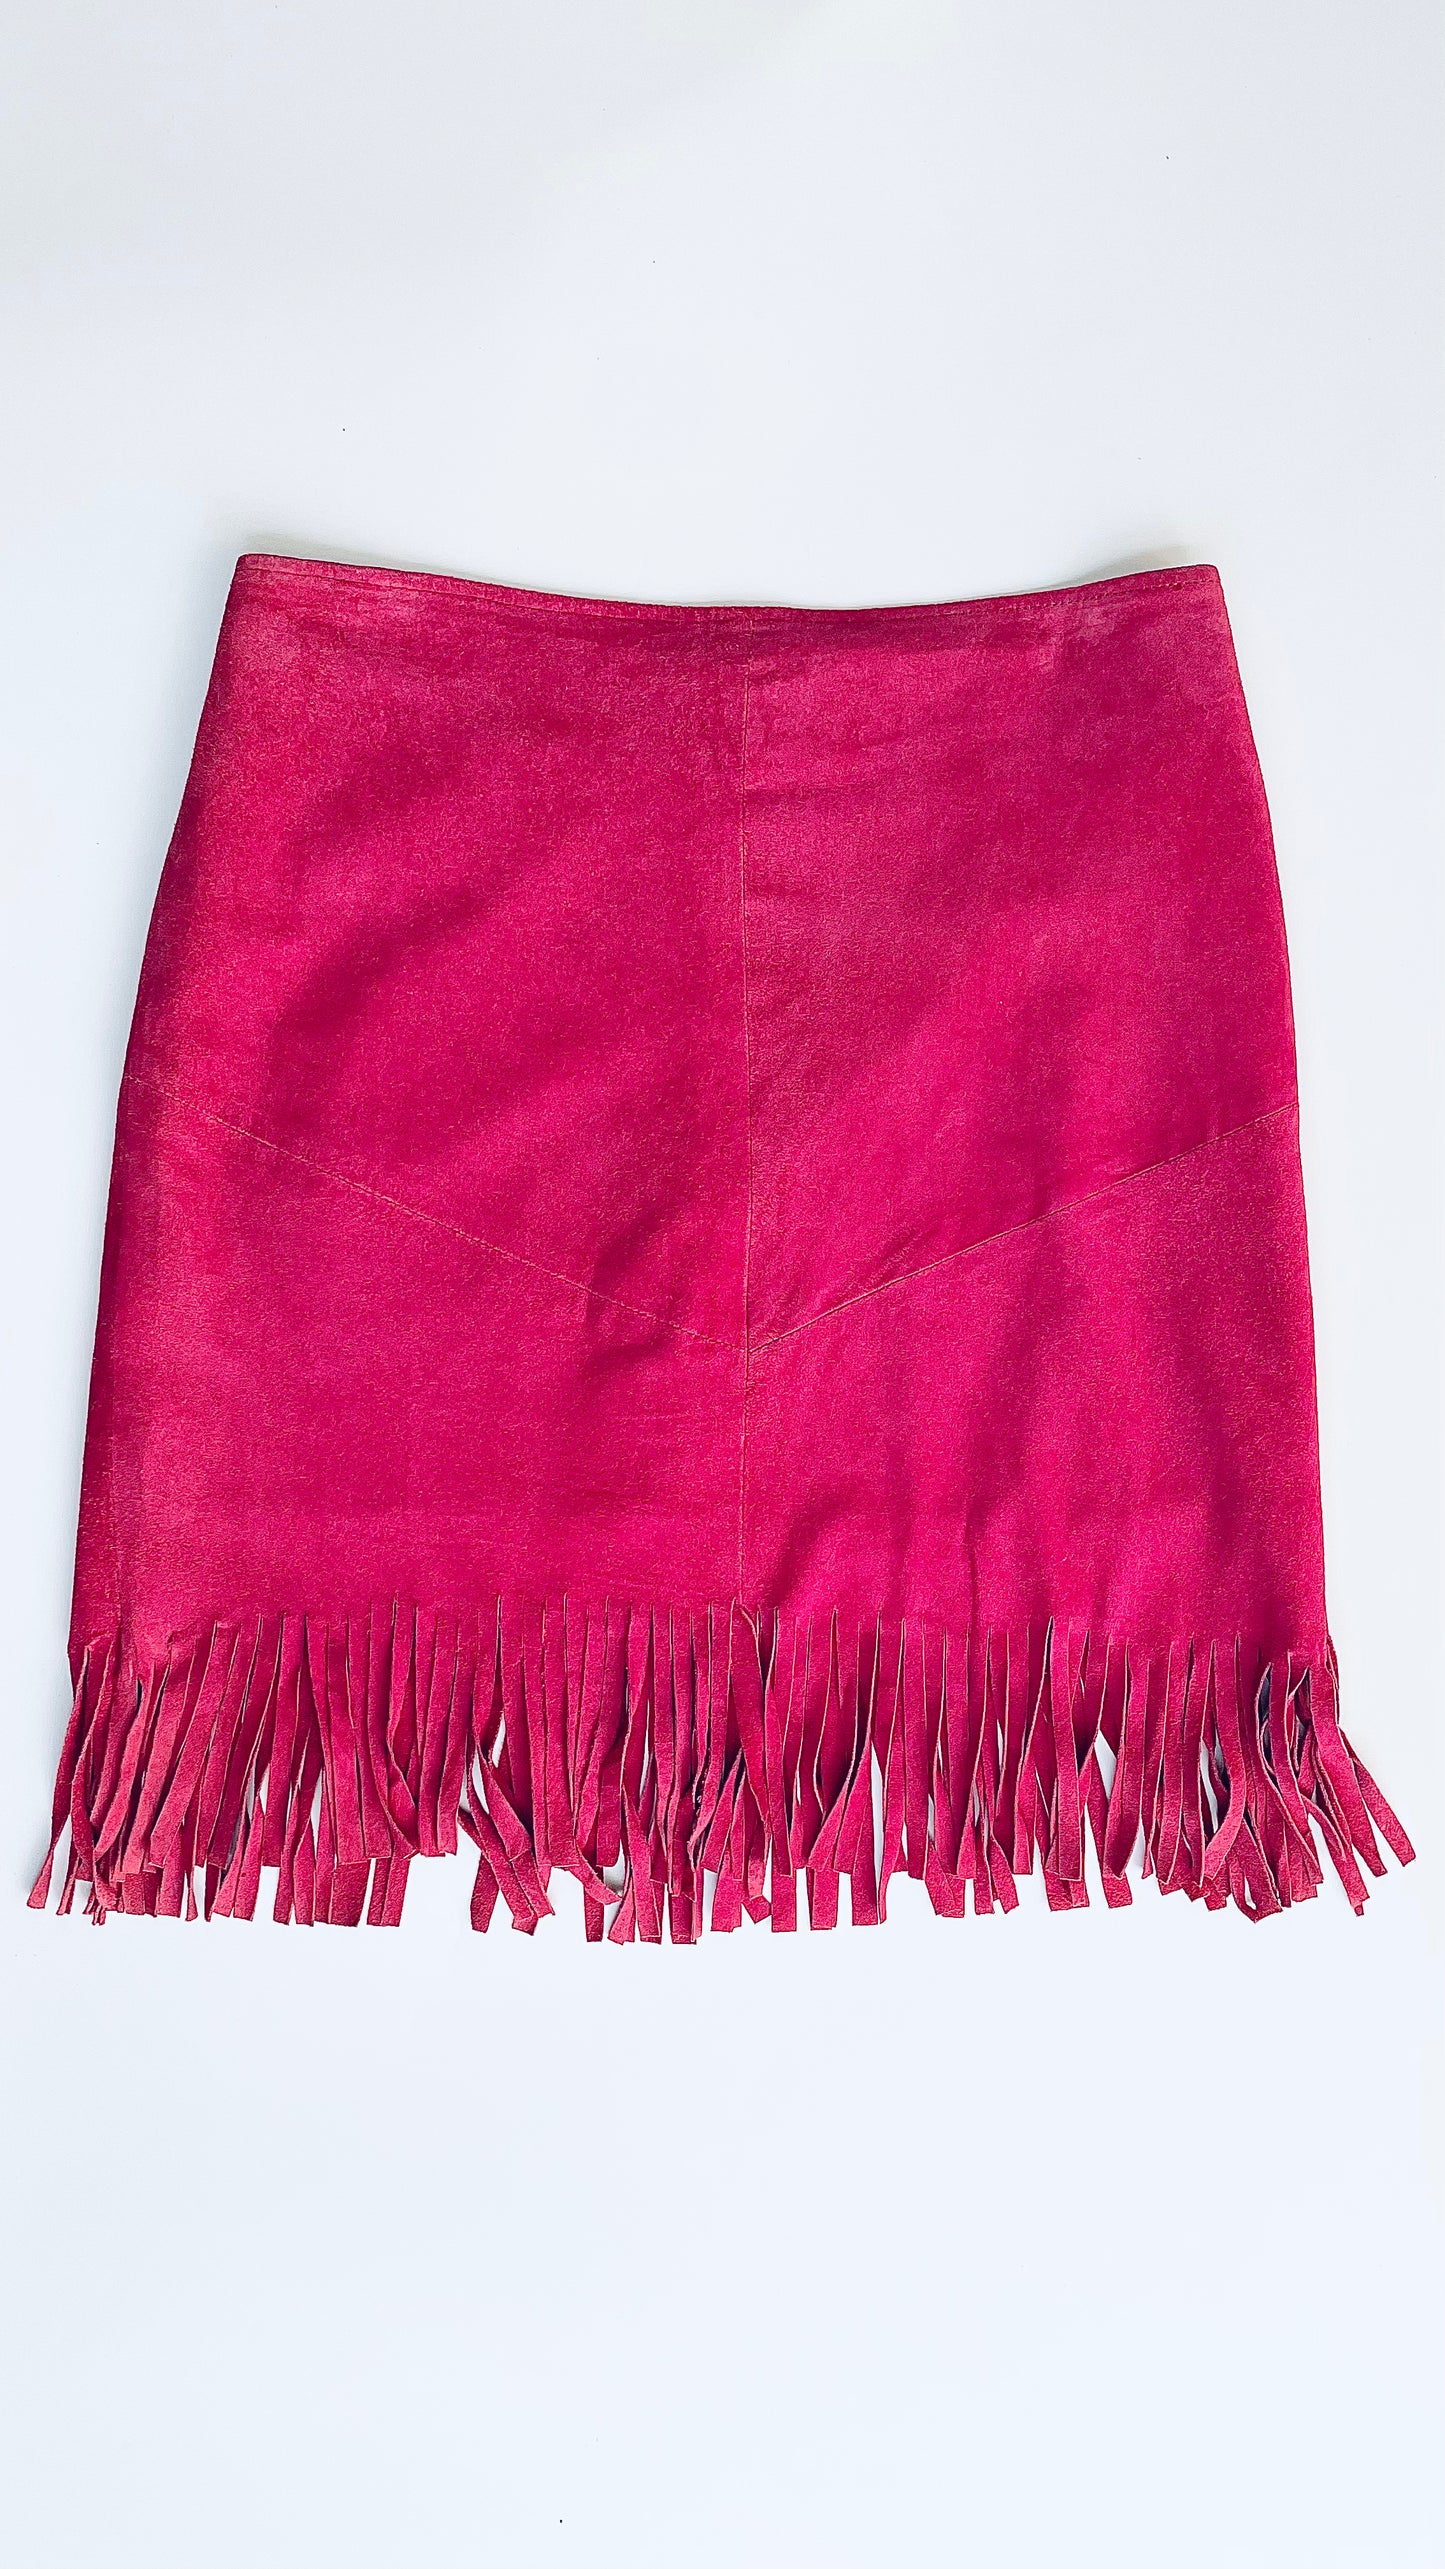 Vintage 90s pink suede mini skirt with fringe - Size 40